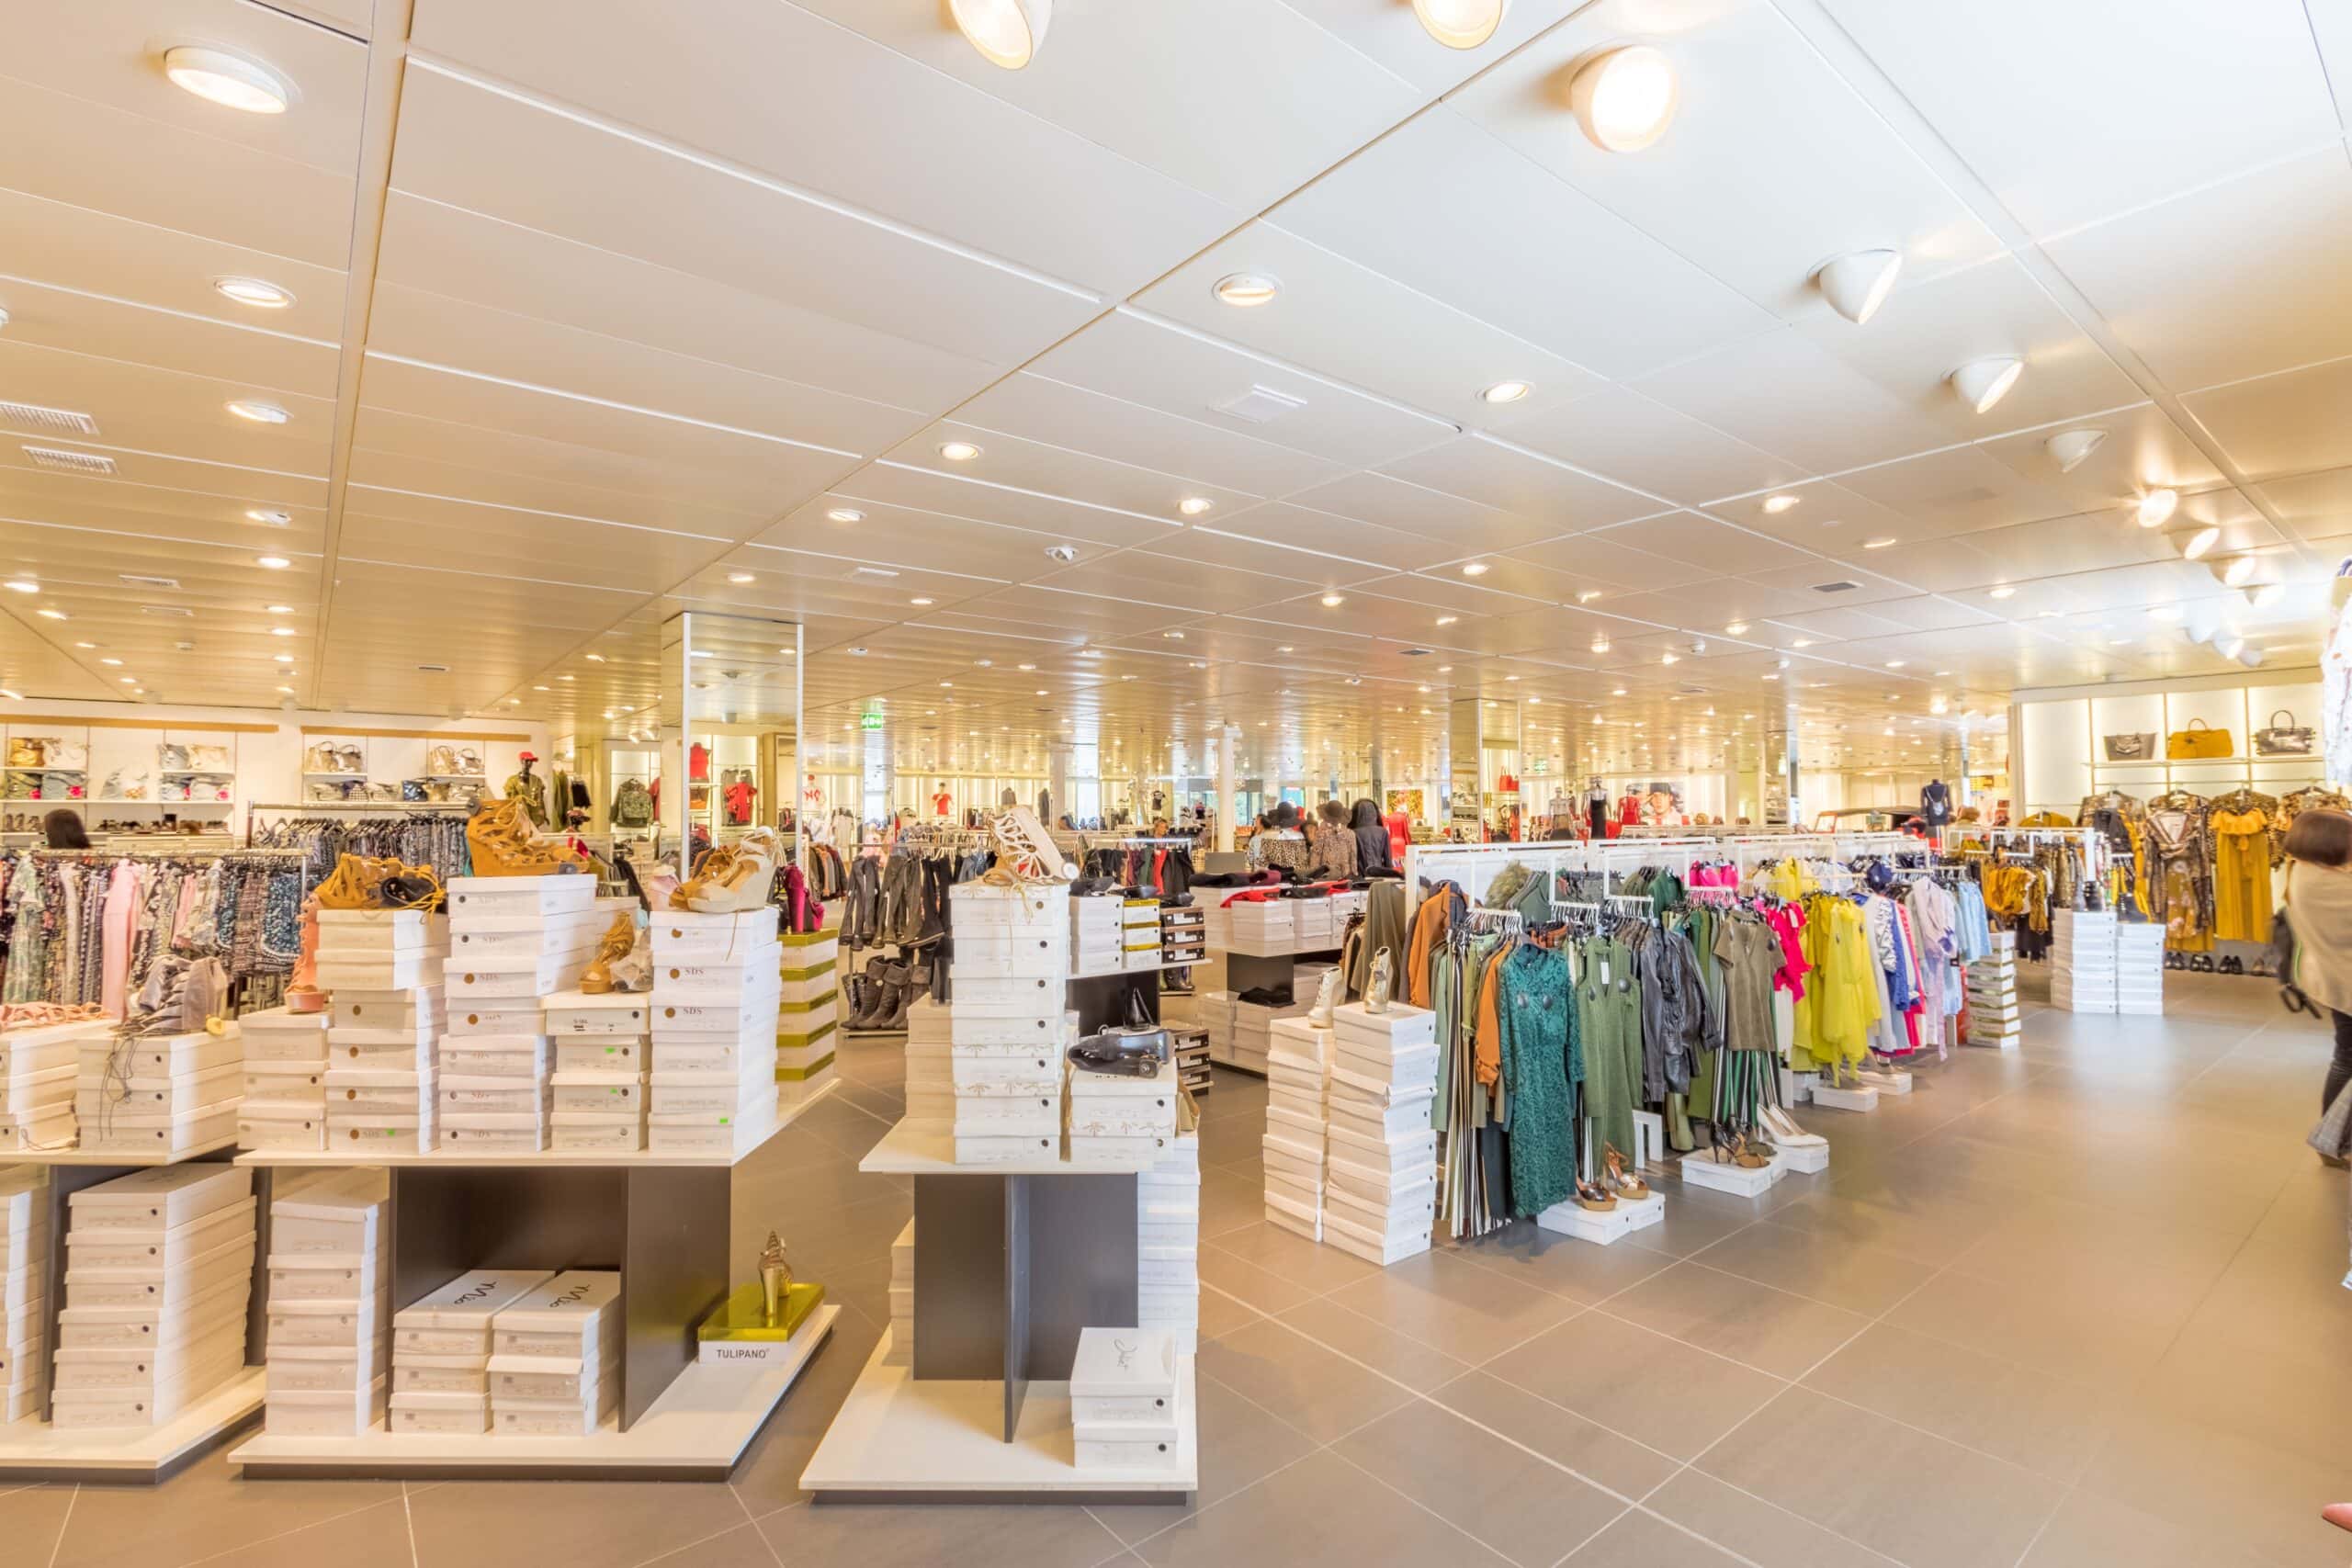 The importance of insights management in the retail industry